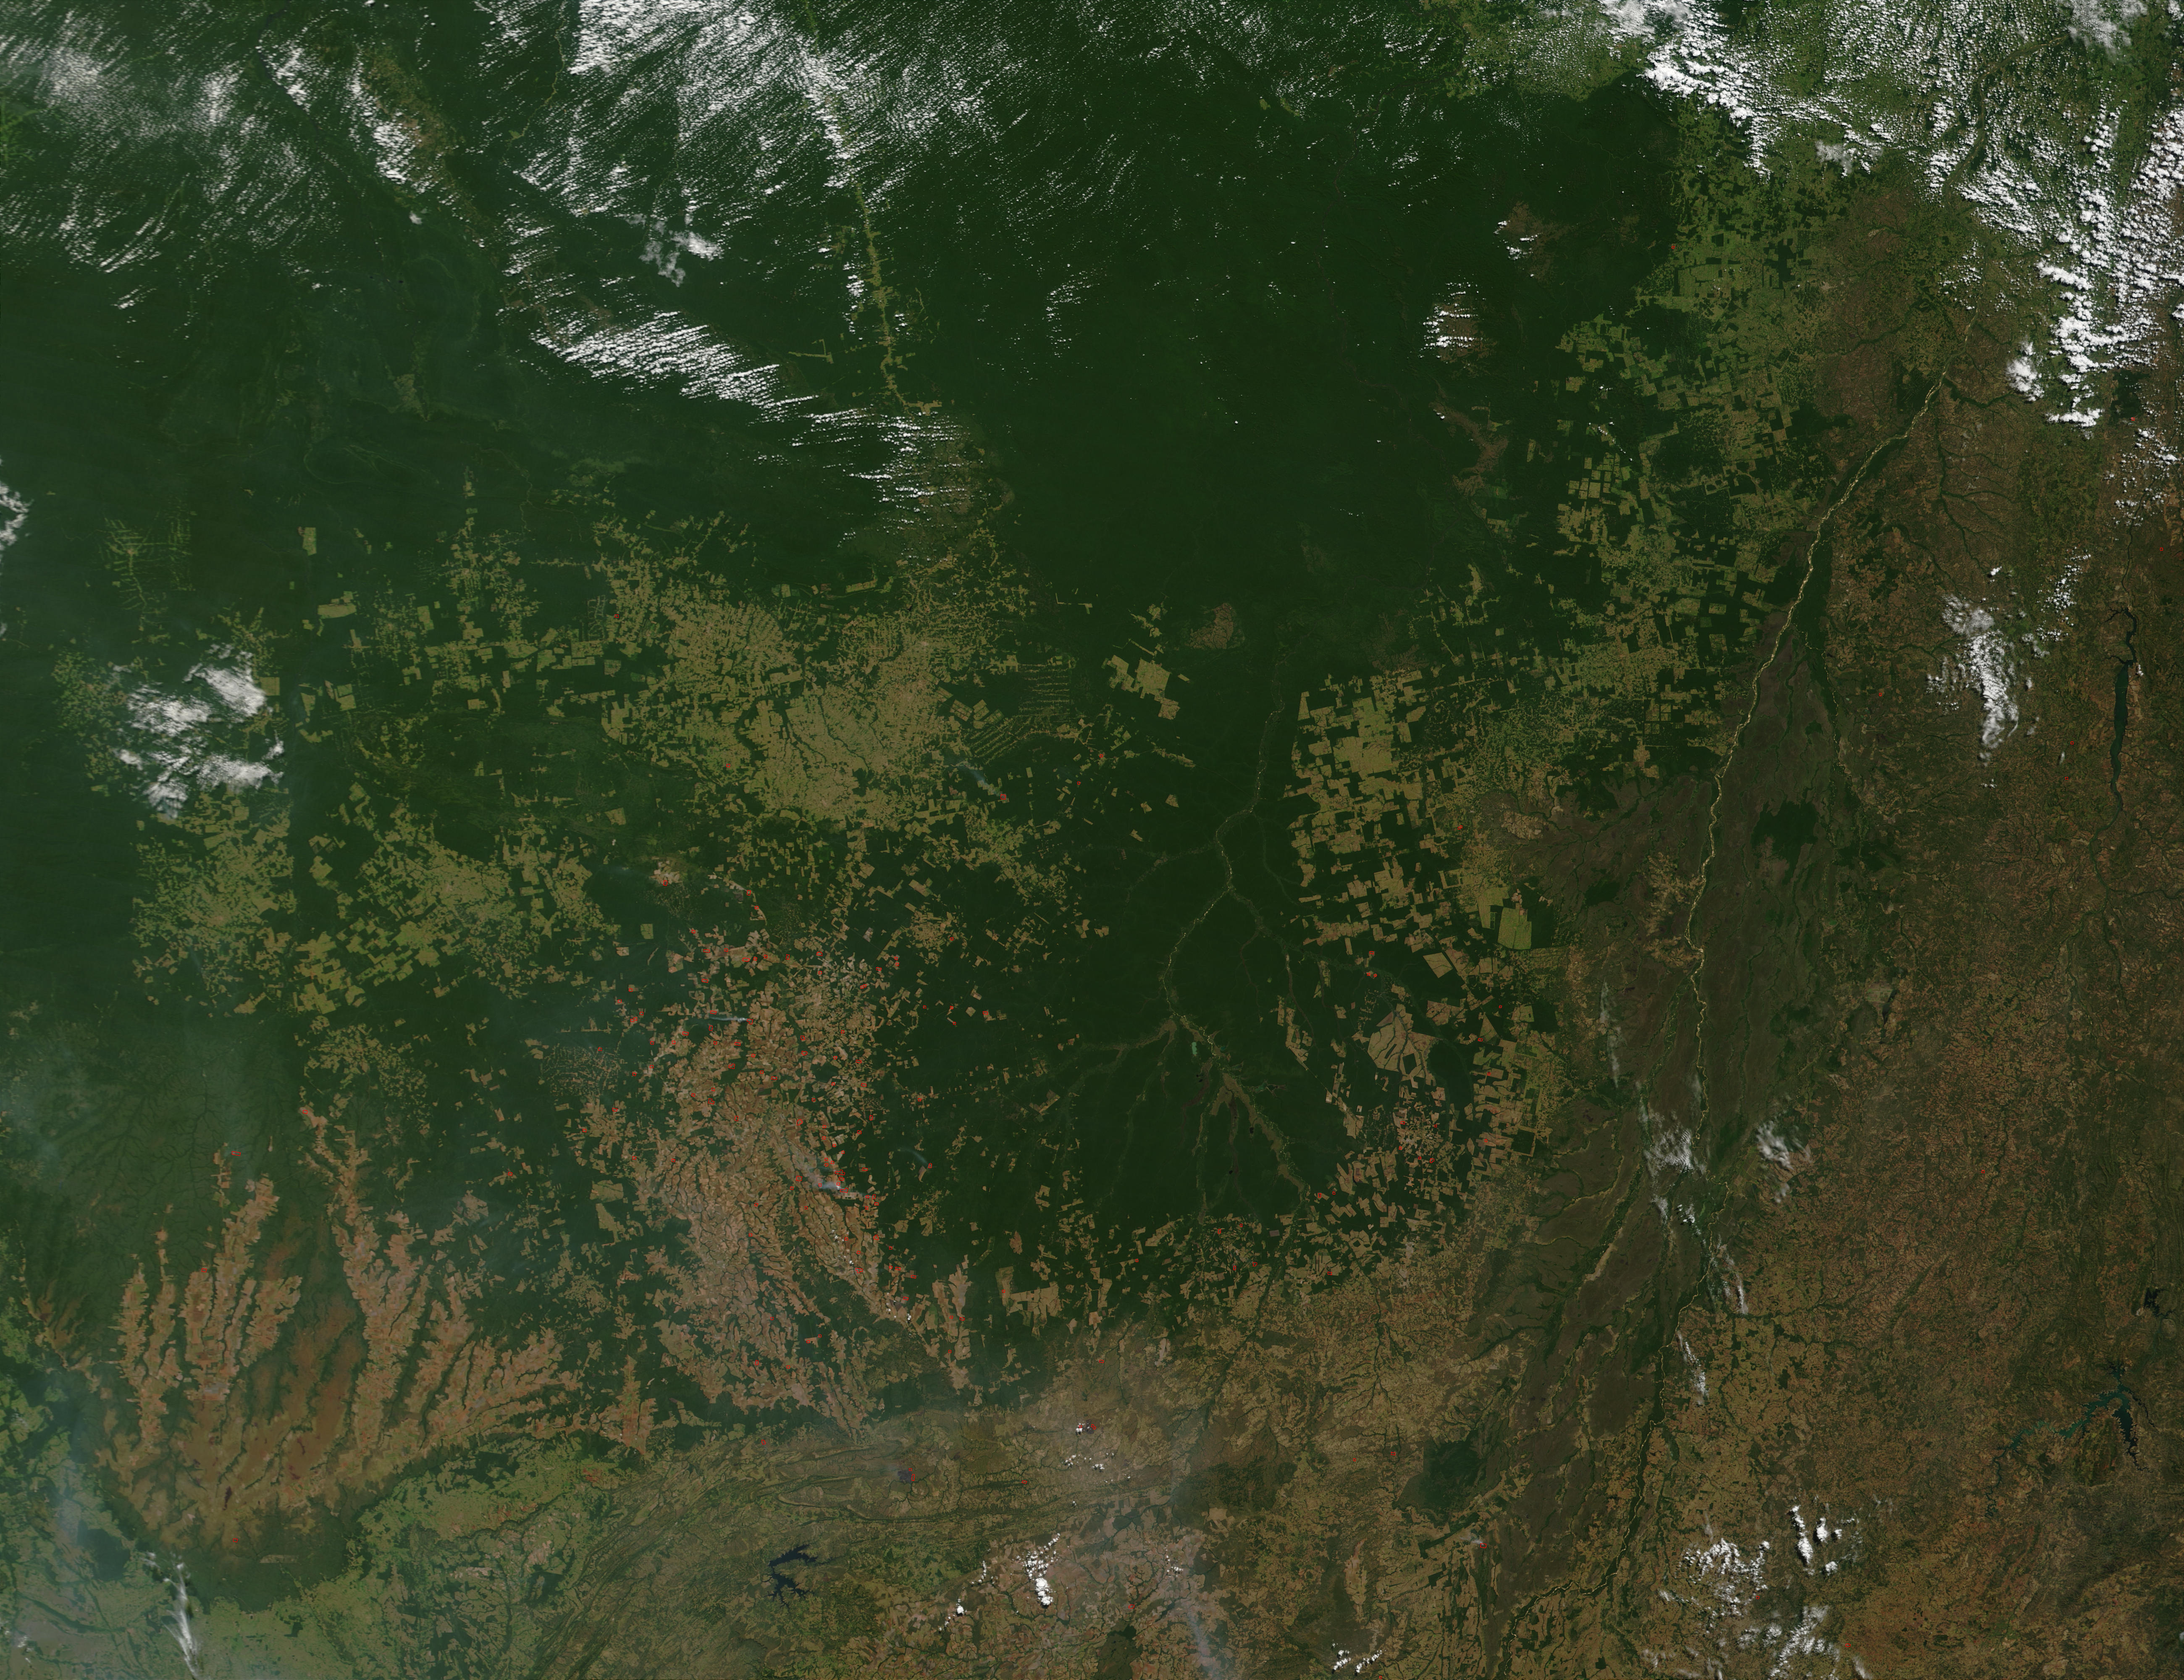 Fires in Mato Grosso, Brazil - related image preview